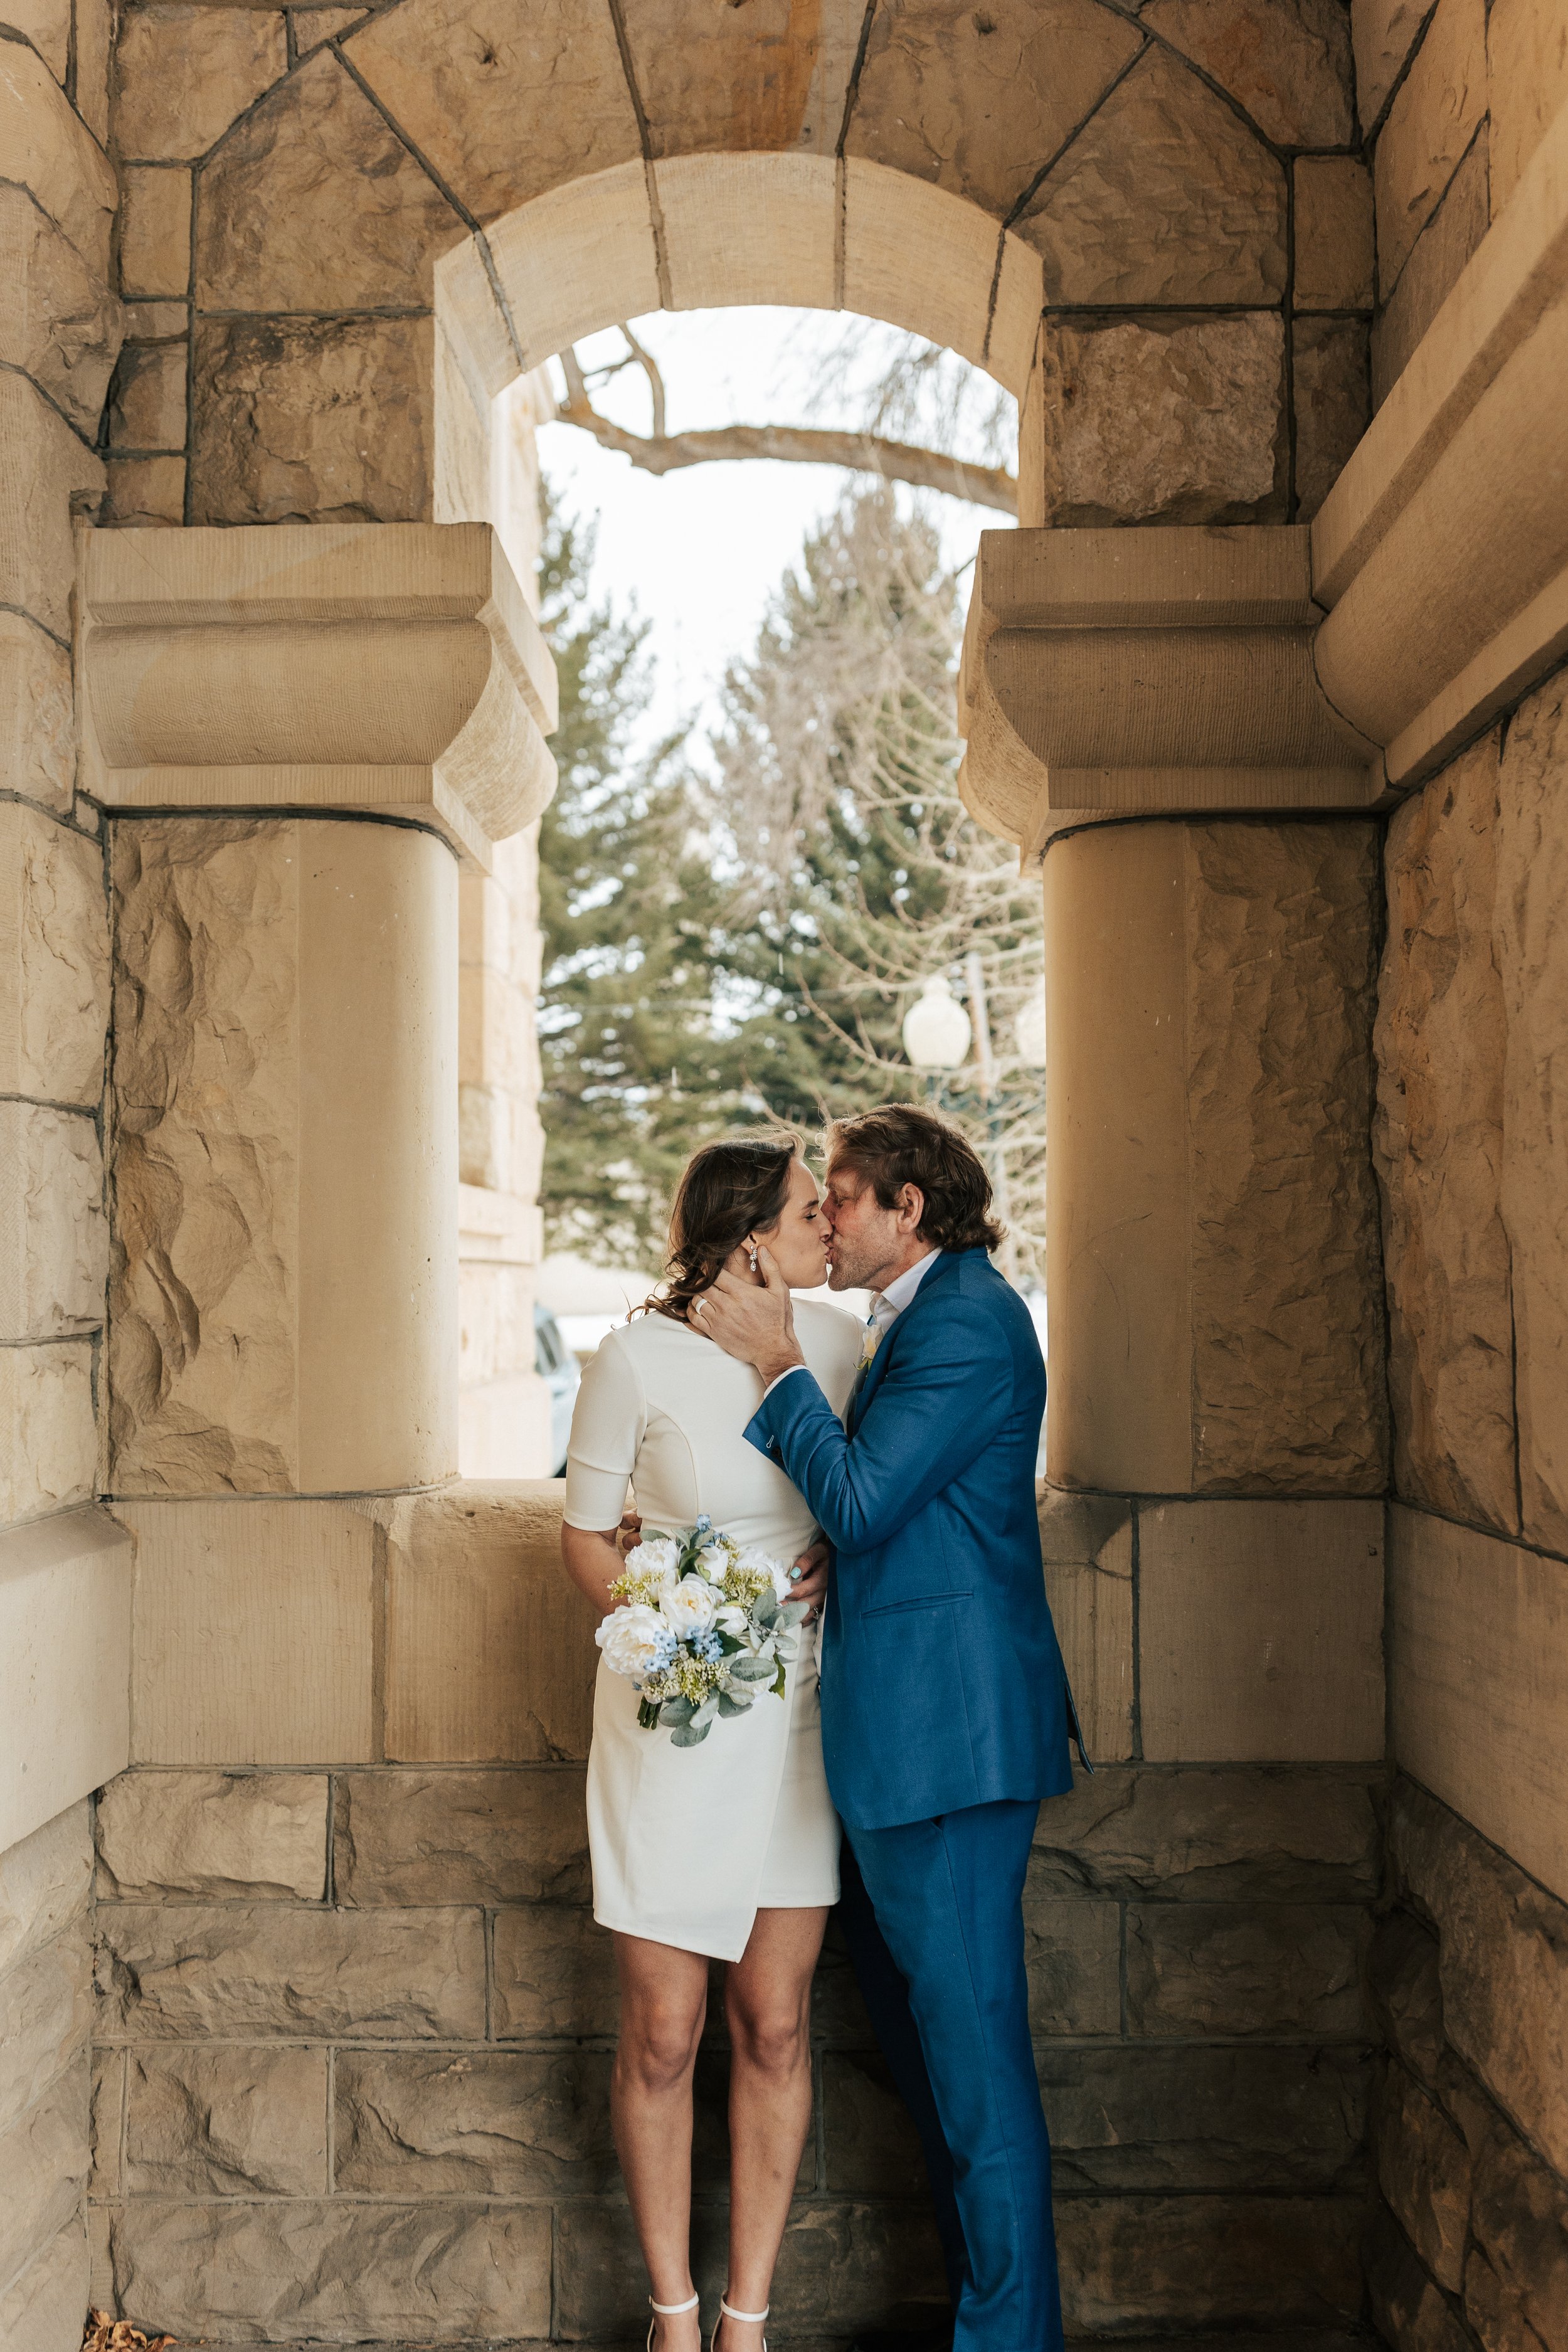  how to get good formals wedding pictures in winter park city utah wedding photographer emily jenkins photo summit county courthouse elopement plans in park city mountain wedding photos winter wedding simple bride and groom #elopement #parkcityutah #